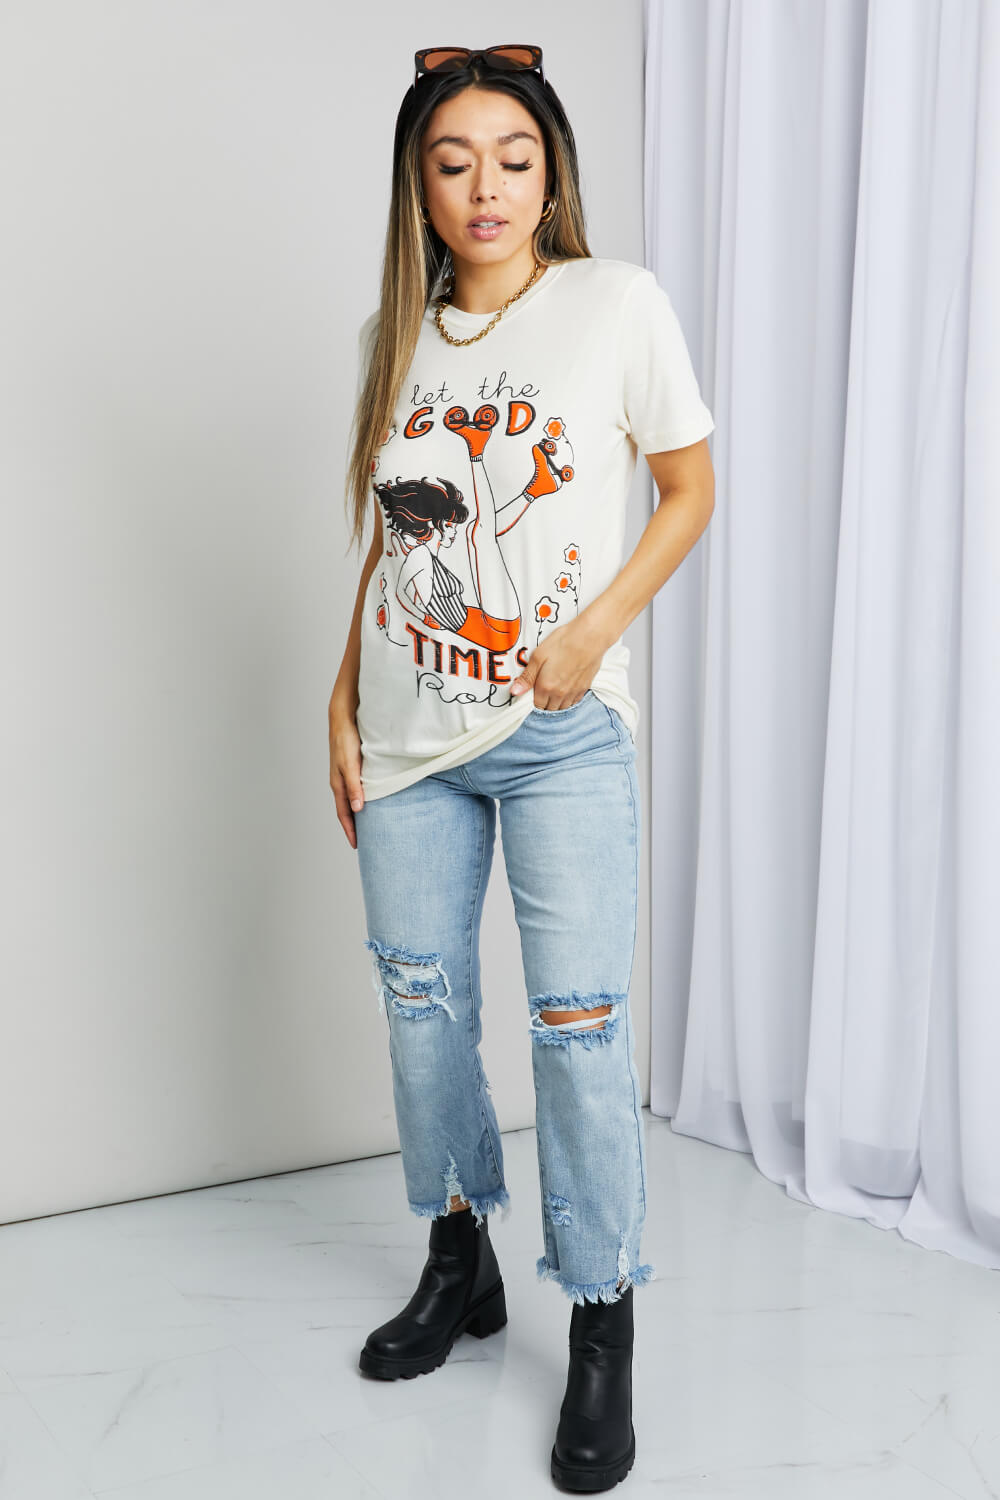 LET THE GOOD TIMES ROLL Roller Skate Graphic Cotton Tee in WhiteTeemineB